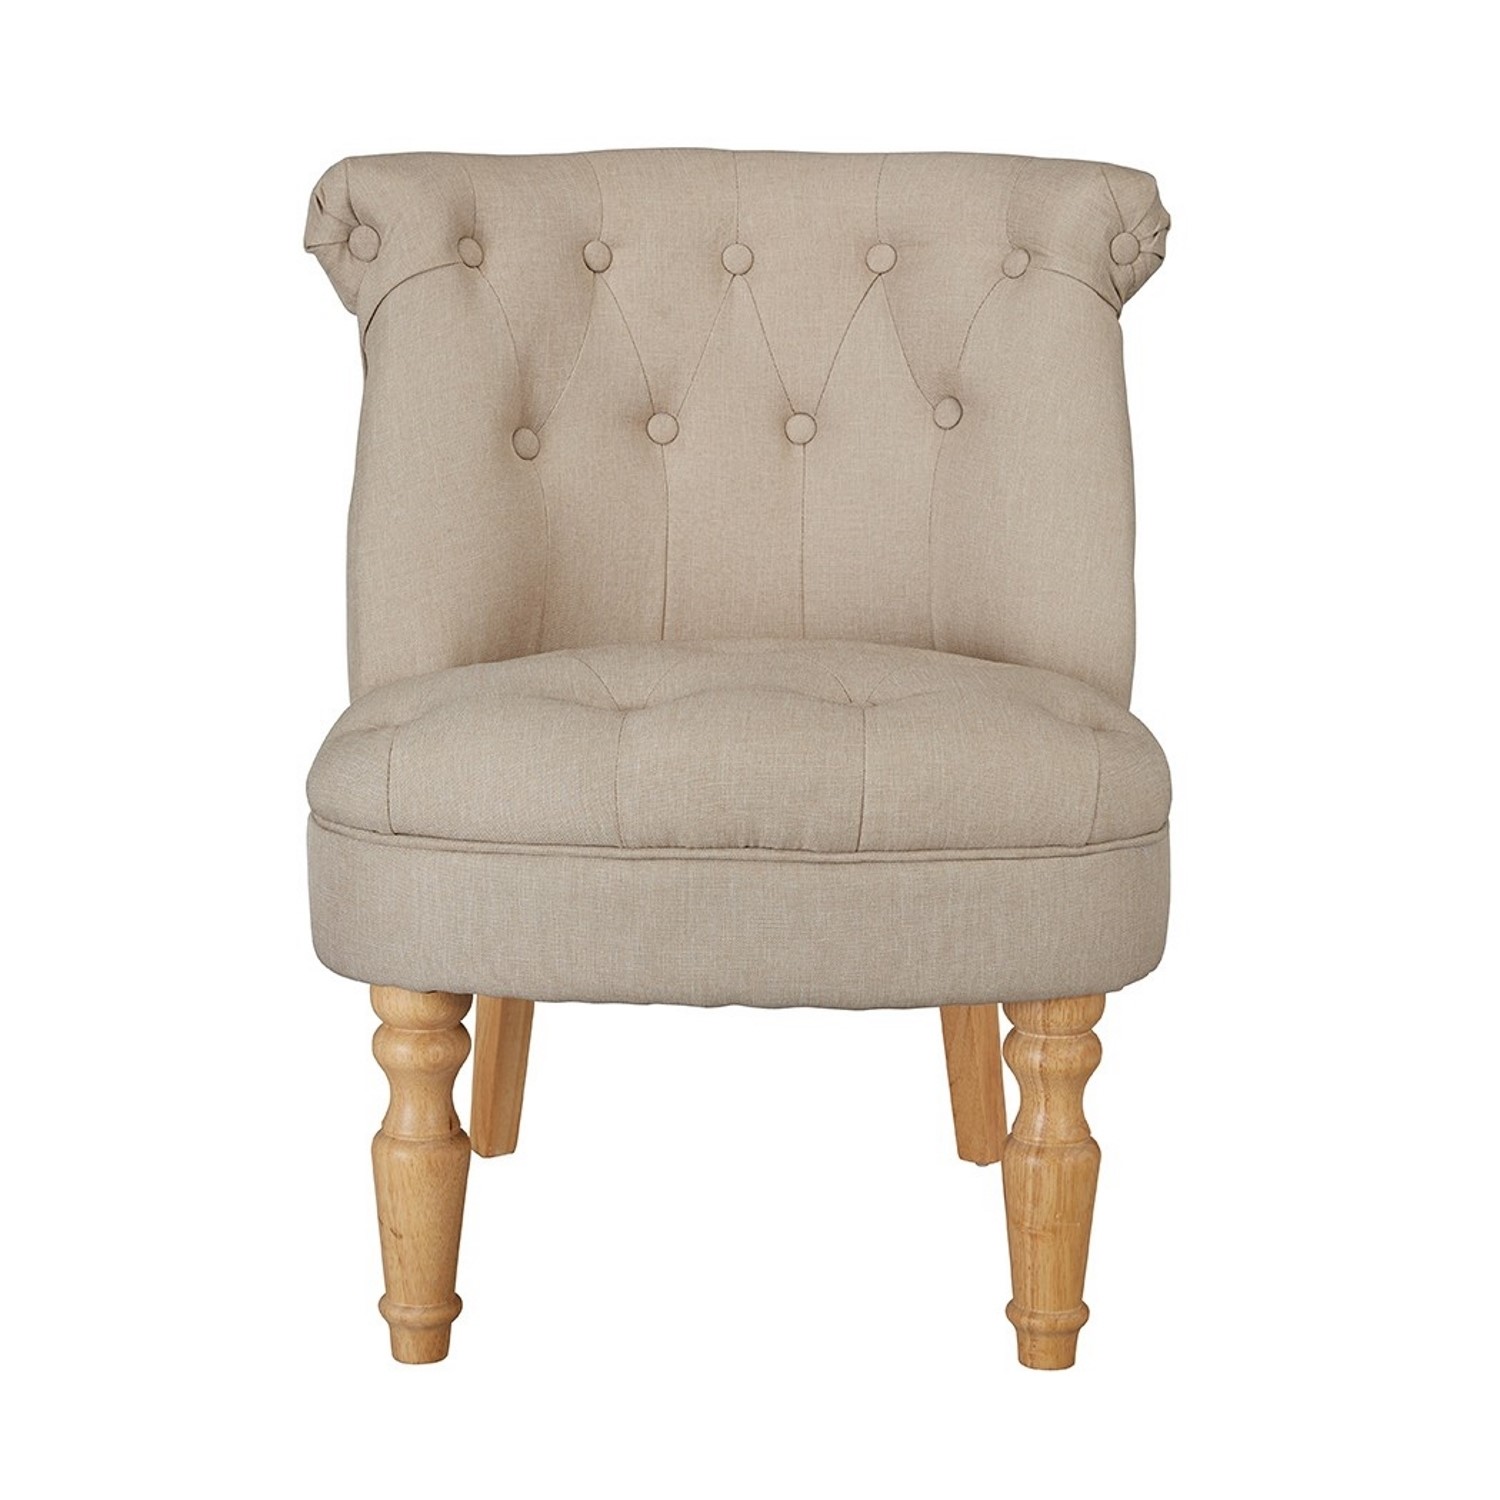 Photo of Beige fabric accent chair - charlotte - lpd